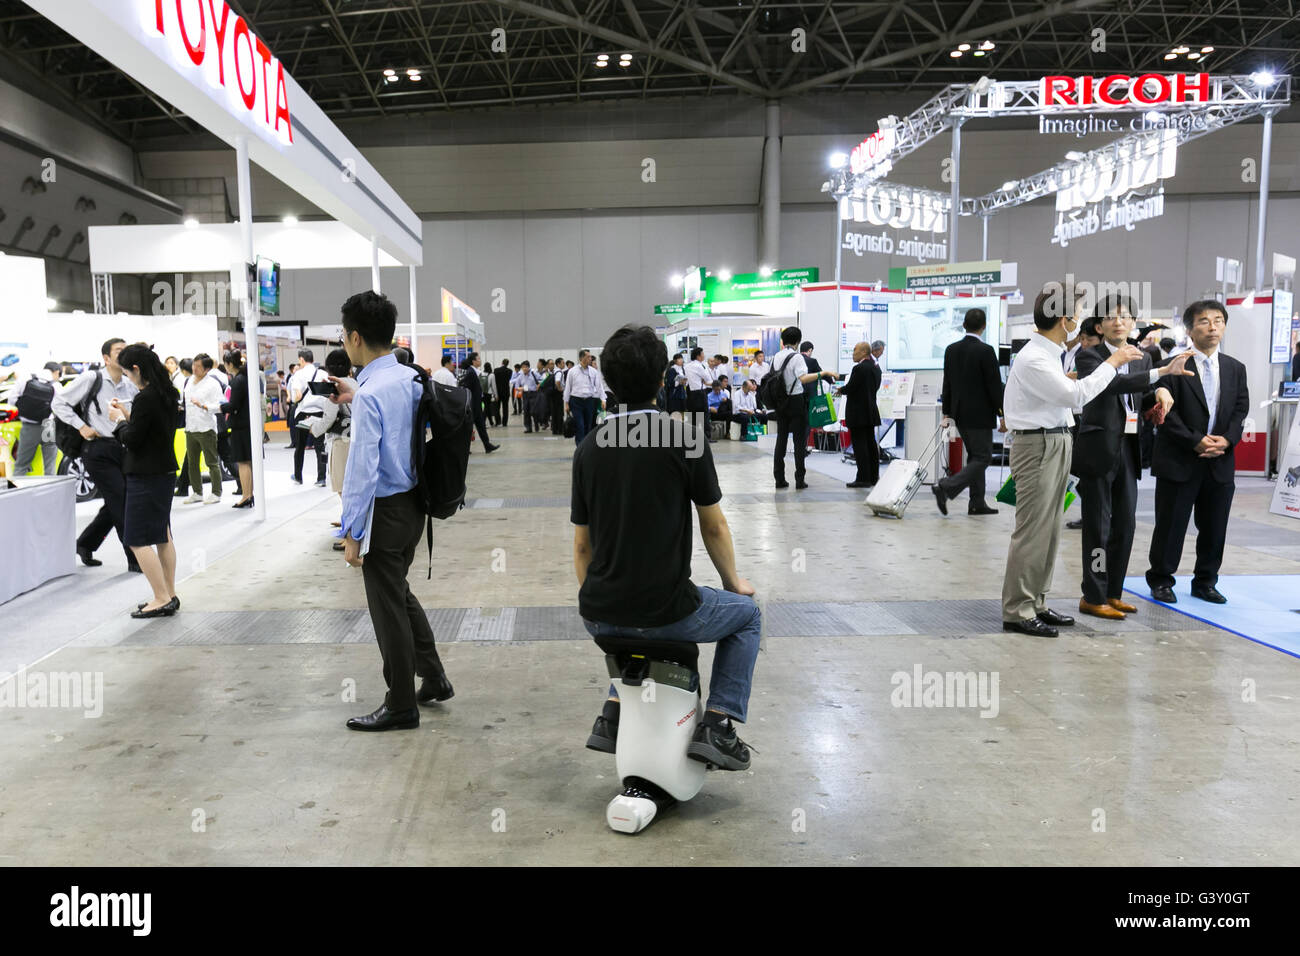 Tokyo, Japan. 16th June, 2016. An exhibitor drives a personal device ''UNI-CUB'' at the Smart Community Japan 2016 show at Tokyo Big Sight on June 16, 2016, Tokyo, Japan. Smart Community Japan promotes the latest technology related to energy security and efficiency over three days at Tokyo Big Sight. This year 296 enterprises and organizations are showing their products. Organisers reported 12,391 visitors on June 15th, the first day of the show. Credit:  Rodrigo Reyes Marin/AFLO/Alamy Live News Stock Photo